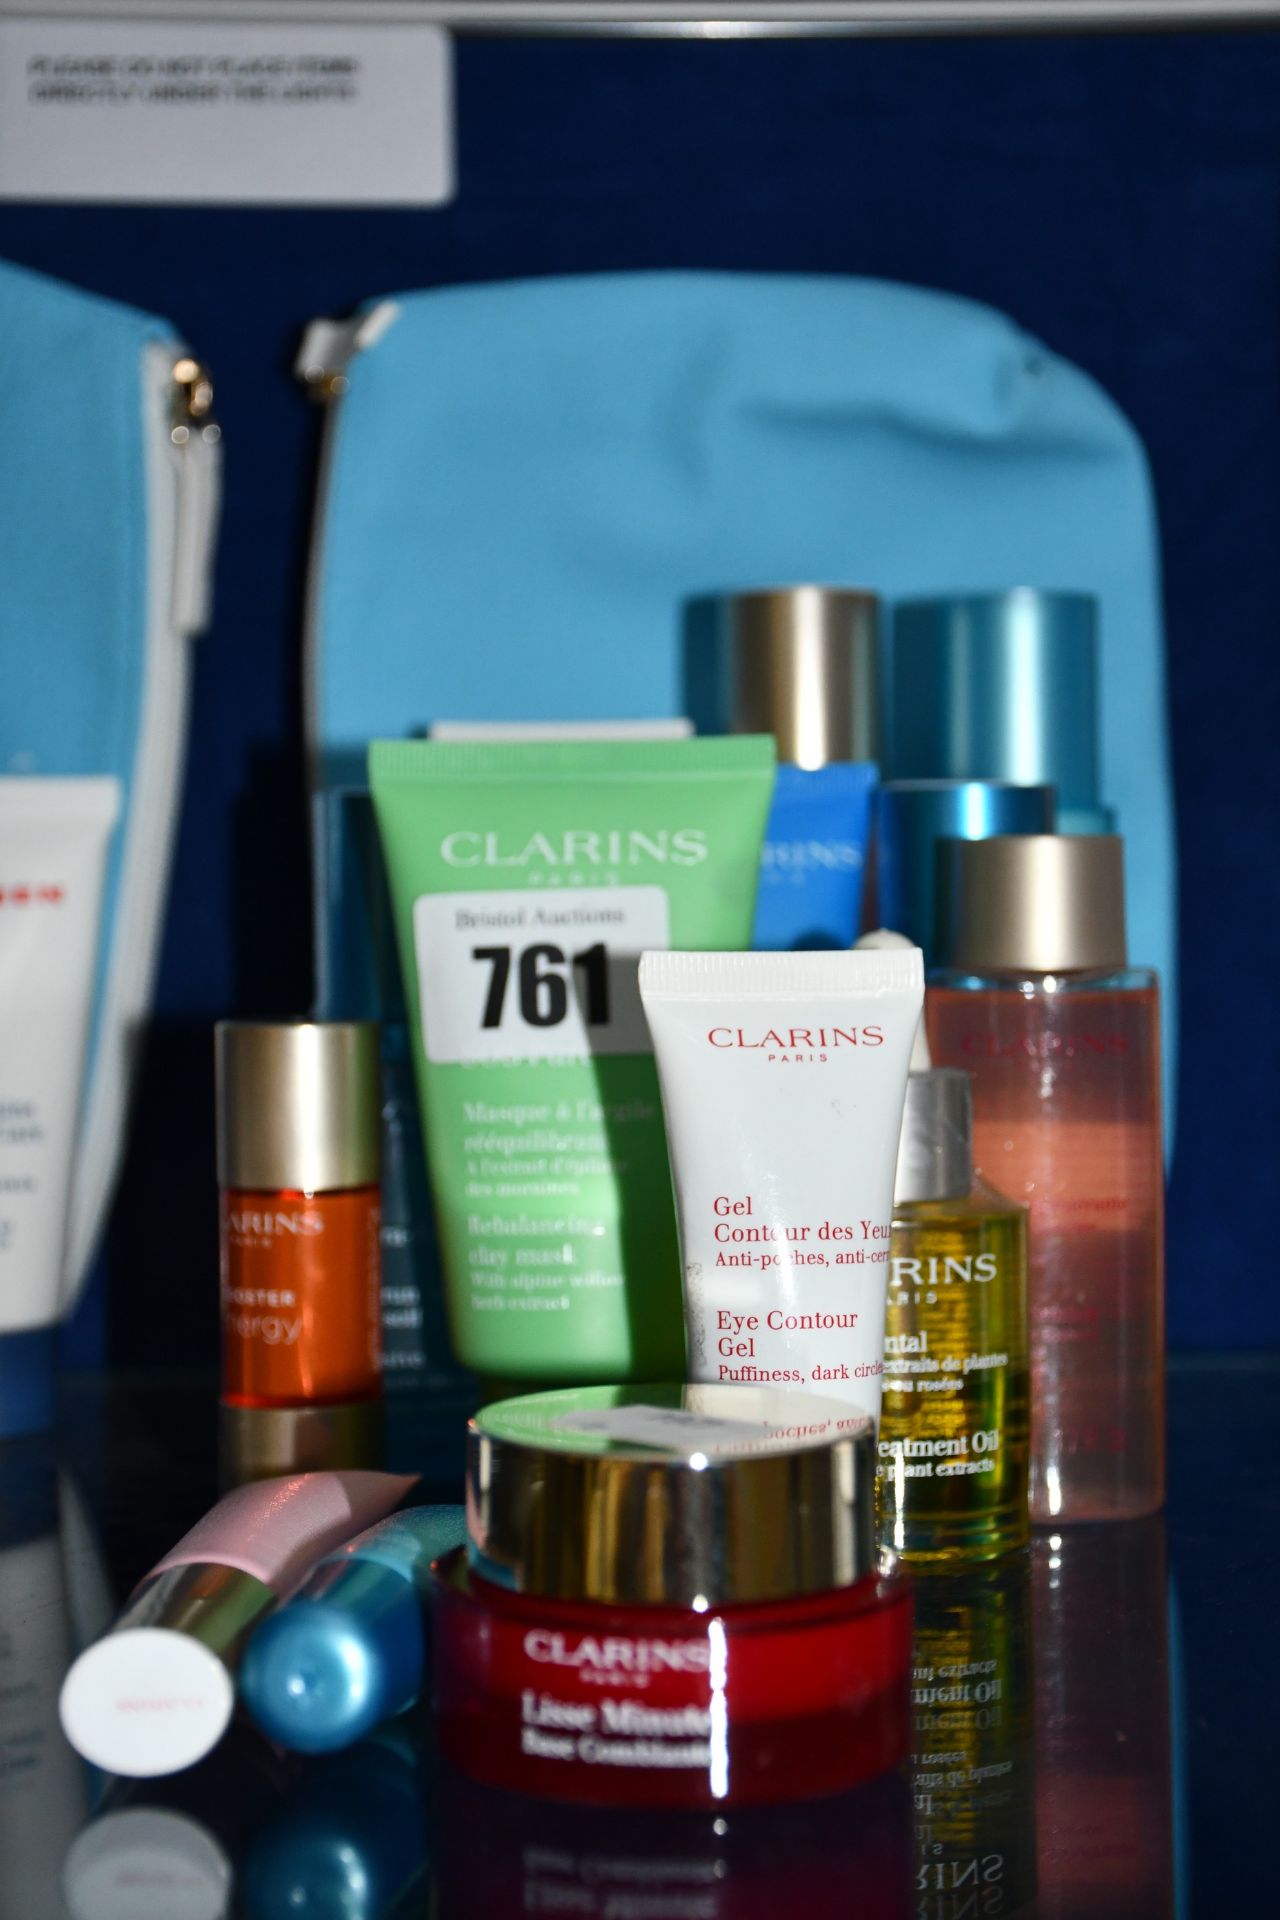 Fourteen items of Clarins toiletries/skin care to include smooth away cream, rebalancing clay